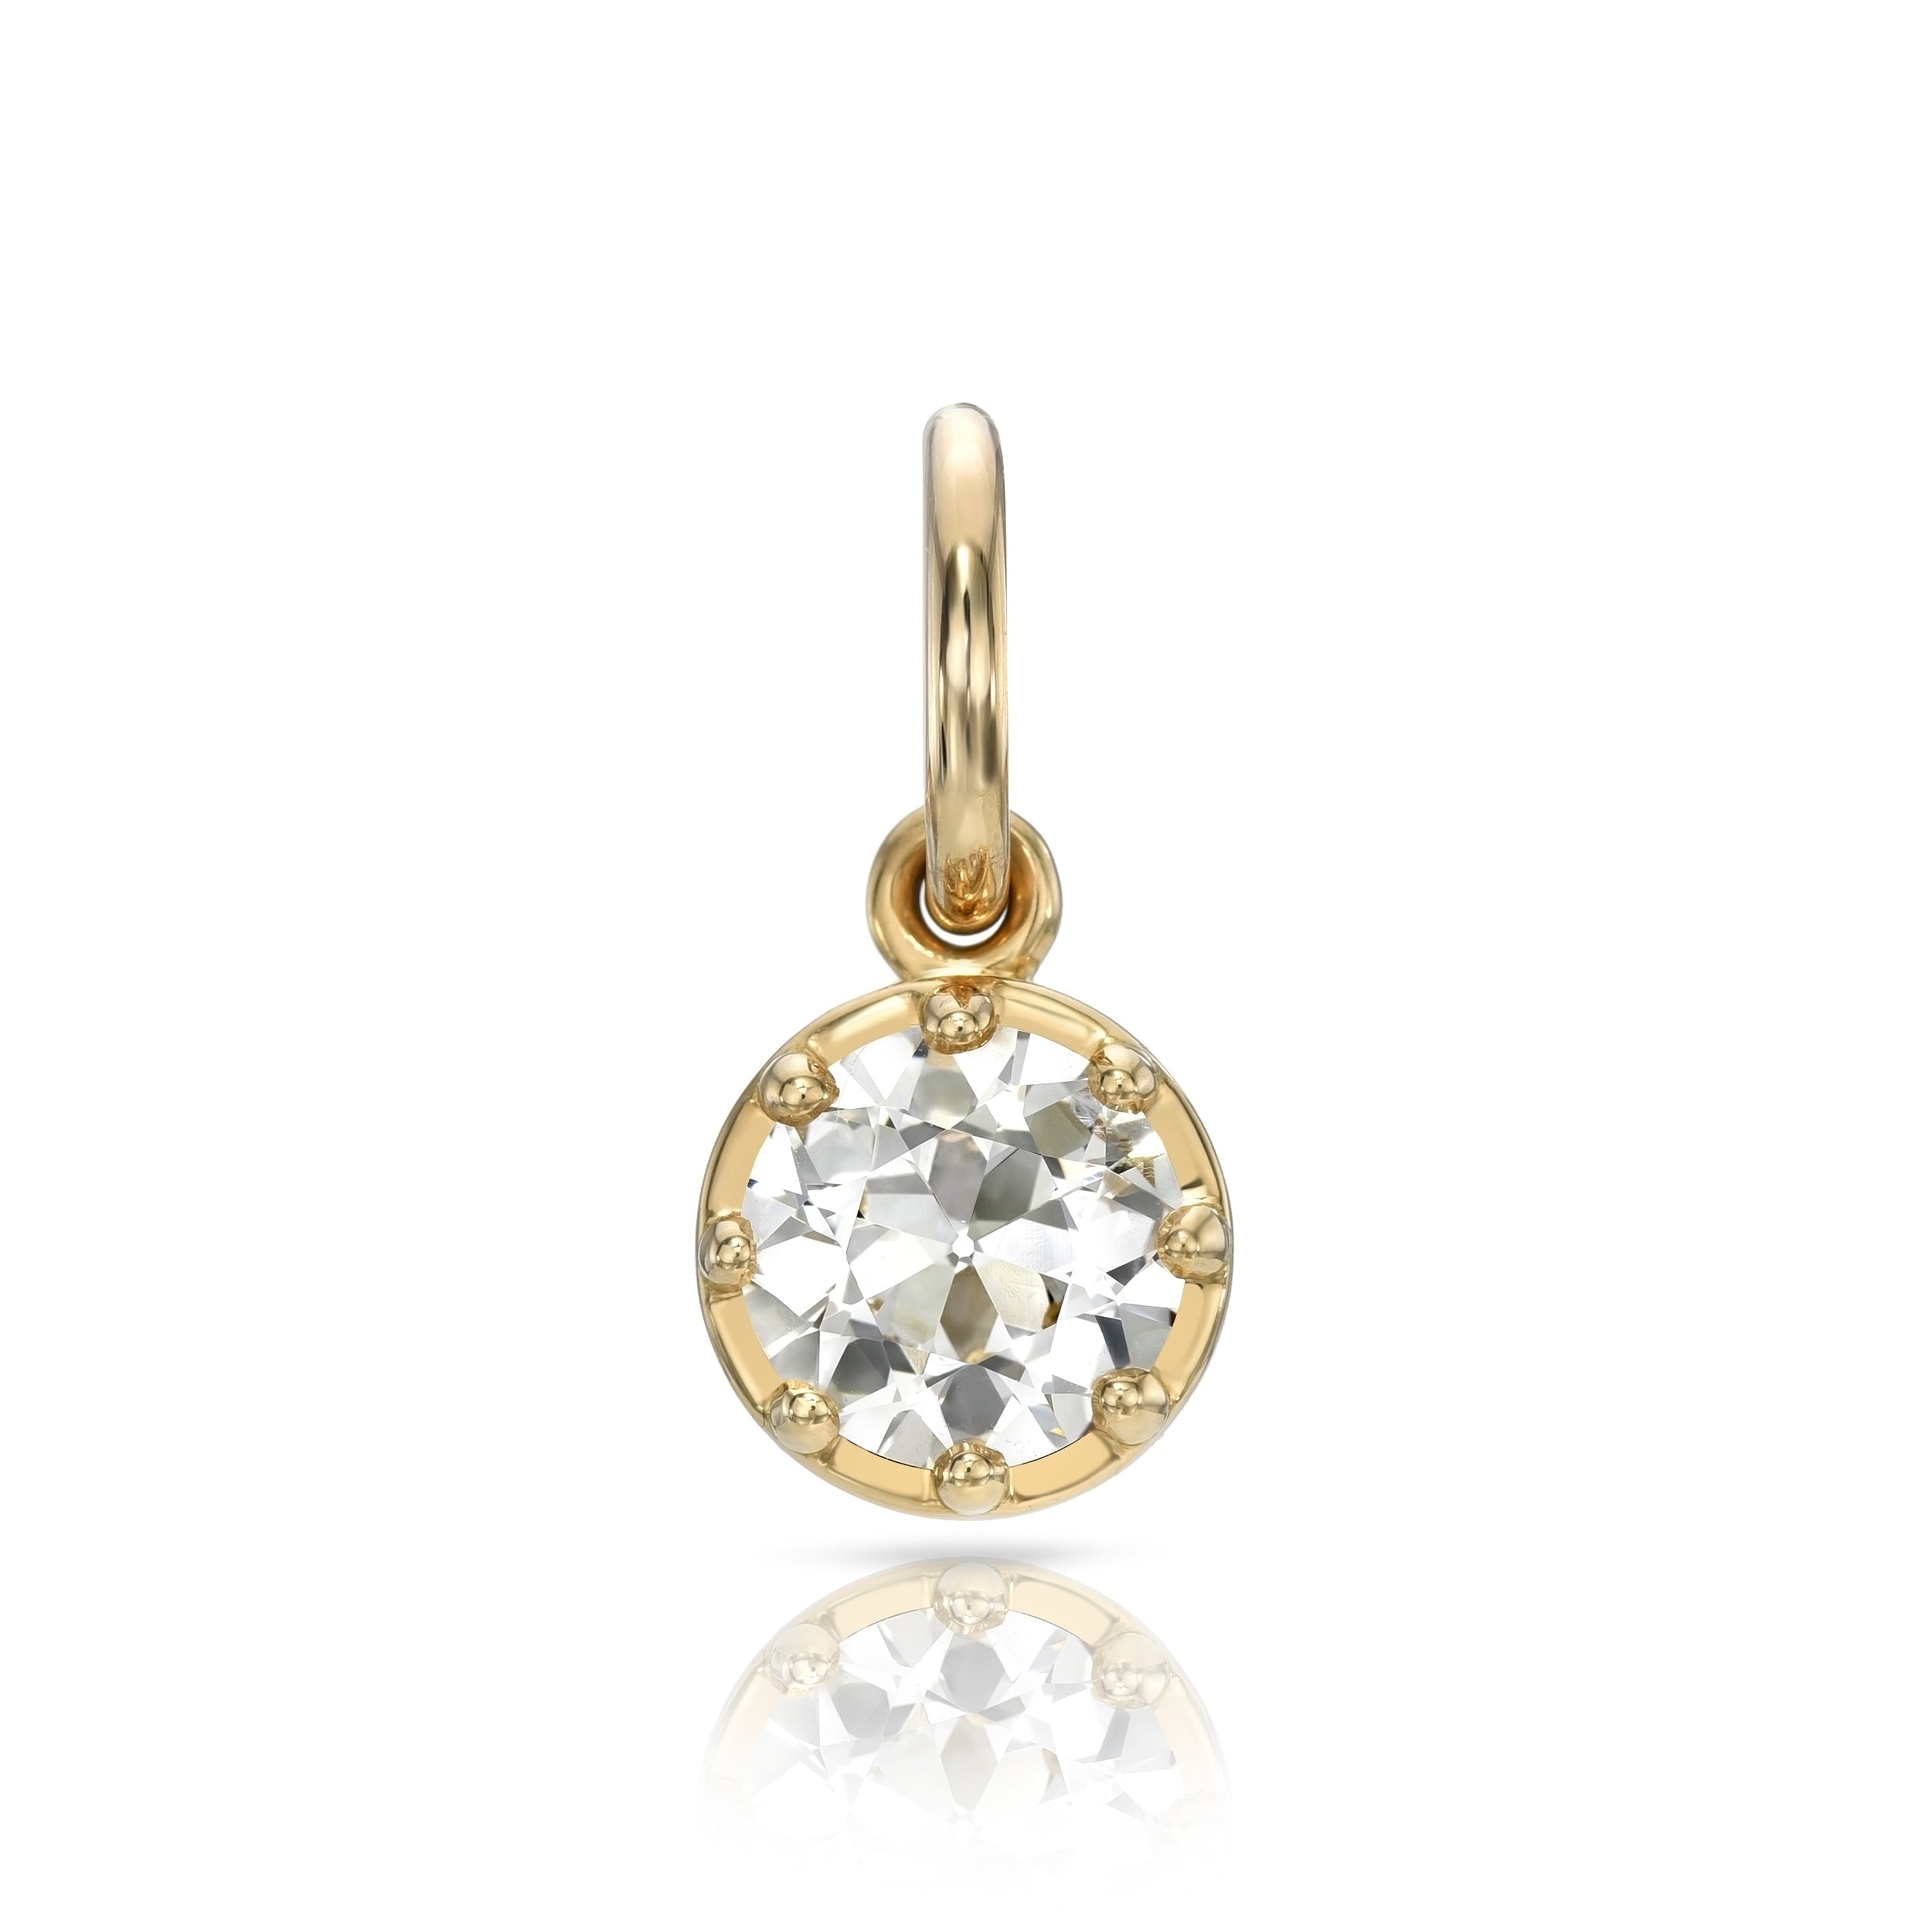 SINGLE STONE POLLY PENDANT featuring 1.58ct L-Faint Brown/I1 GIA certified old European diamond prong set in a handcrafted 18K yellow gold pendant.